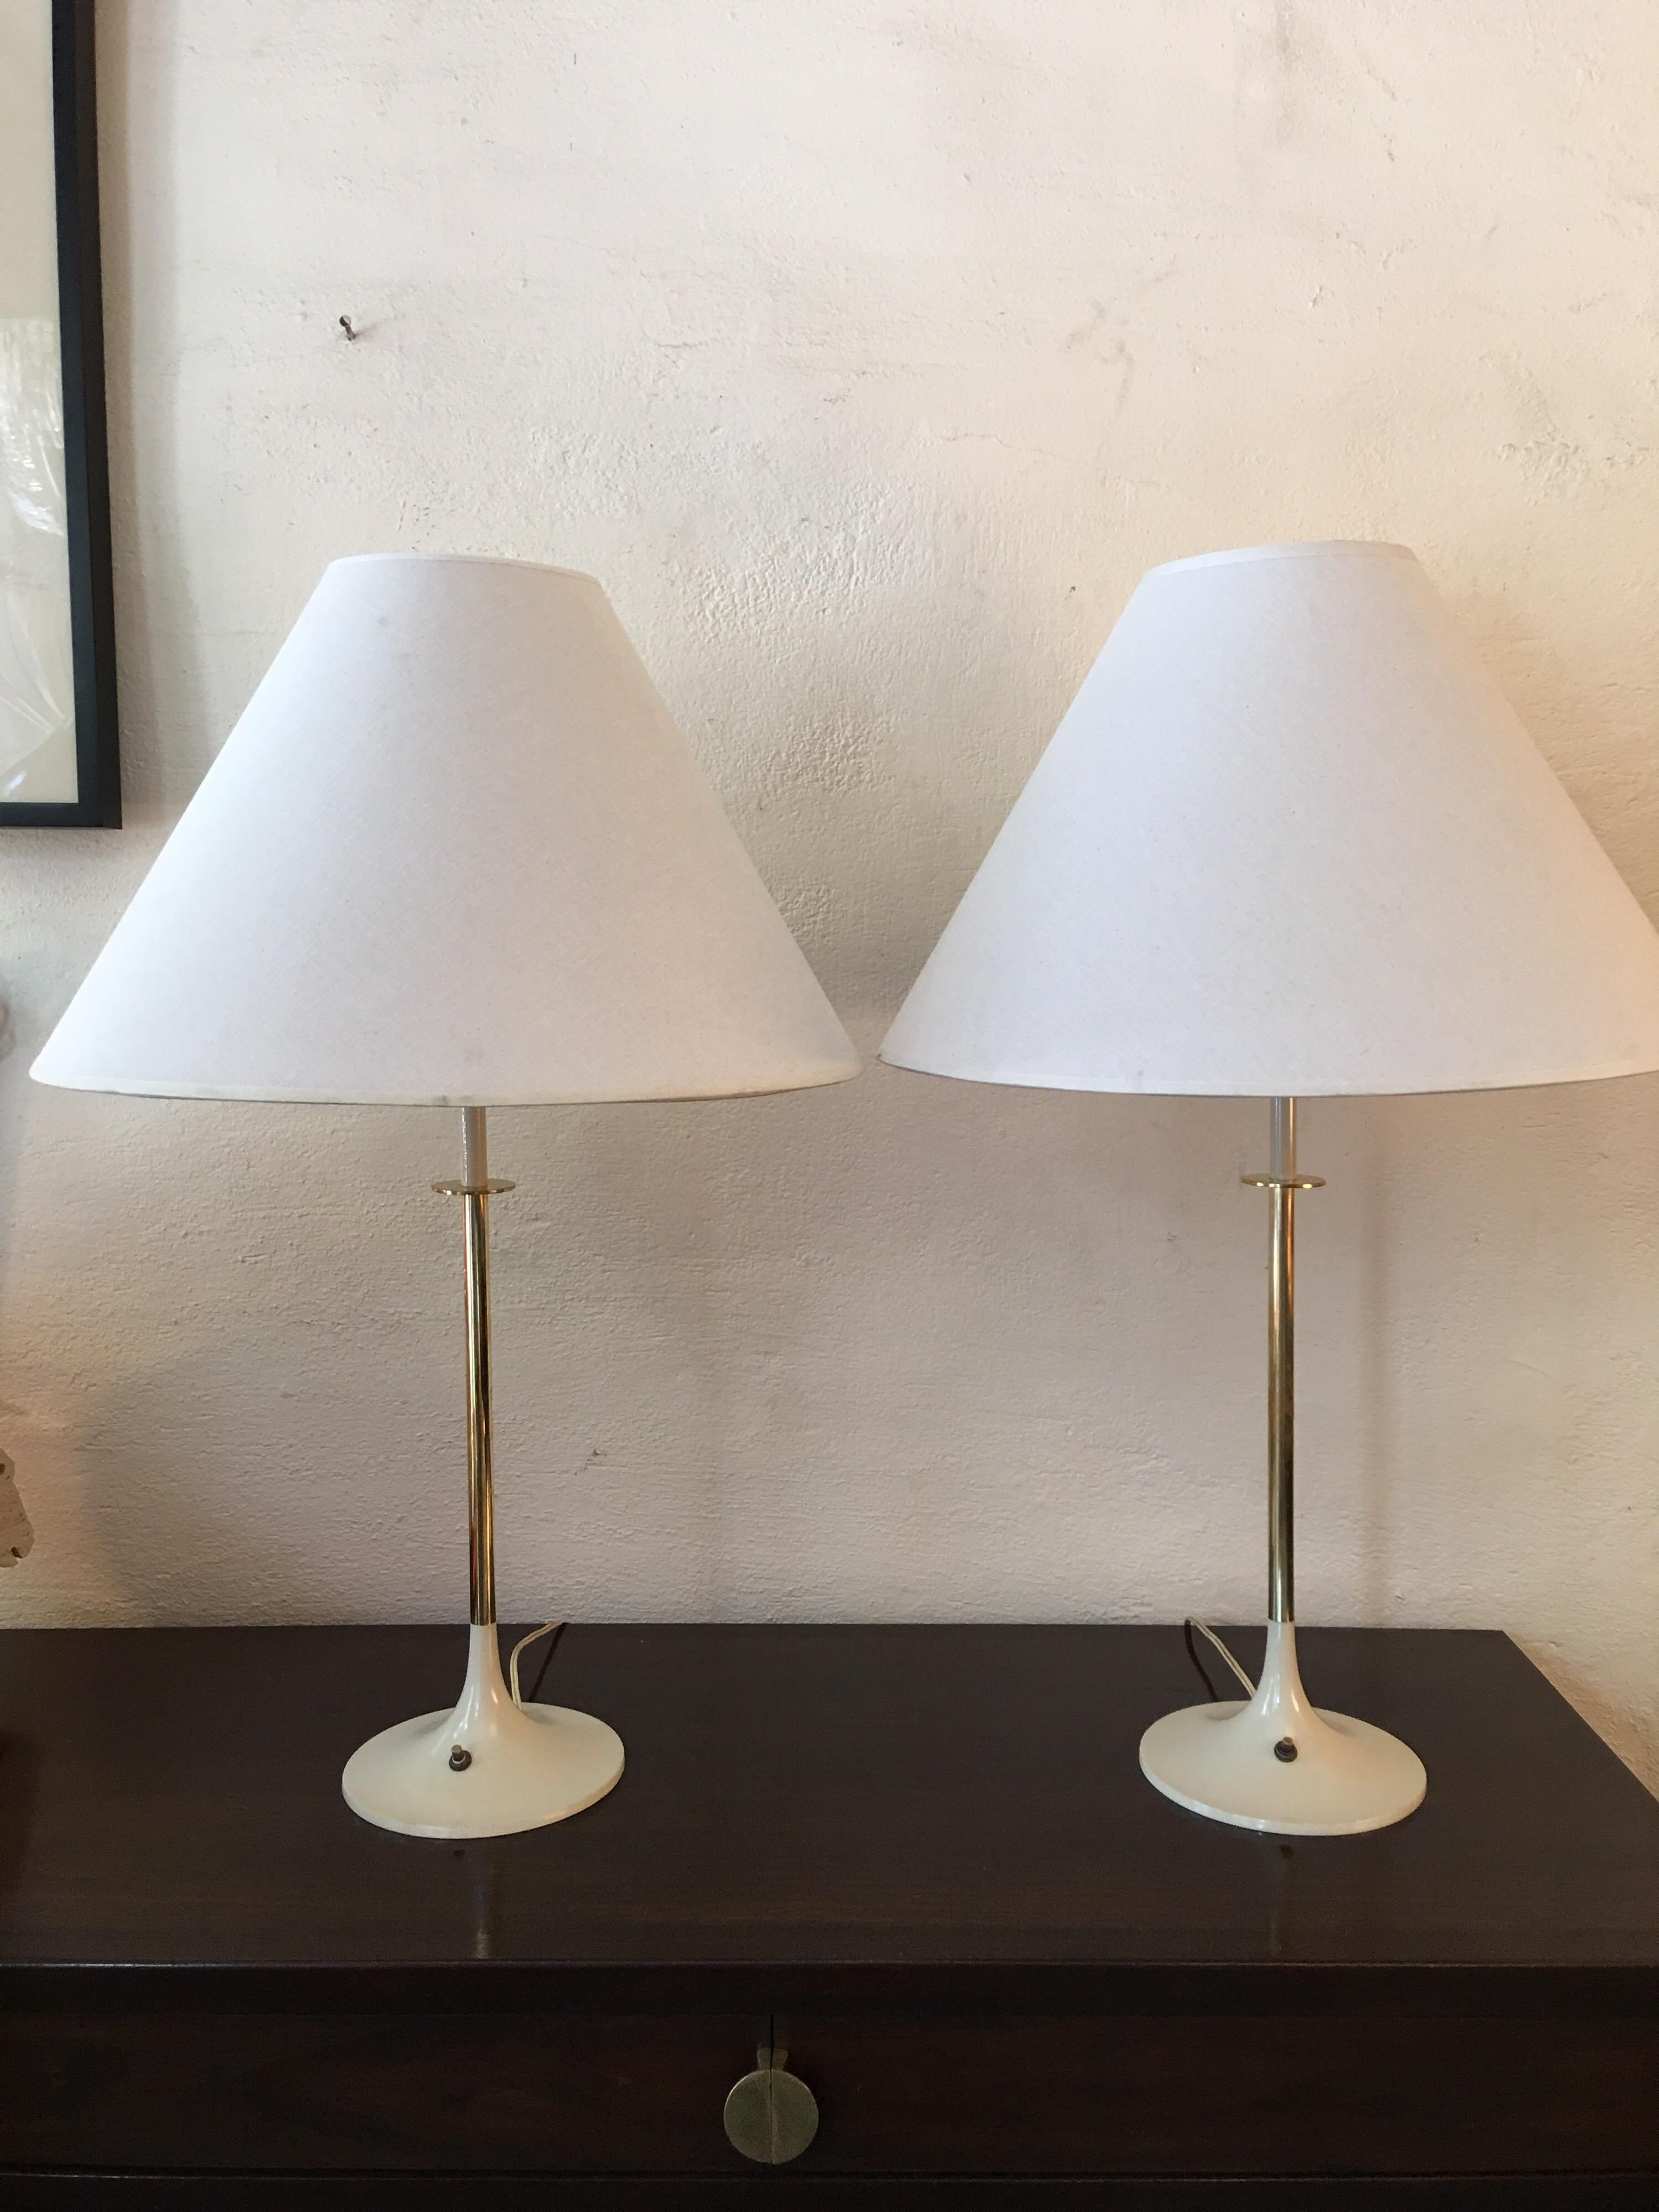 Laurel tulip base table lamps. Simple streamline tulip design with switches on bases. Cream painted with brass accents. Hard to find design from Laurel. Sockets retains partial Laurel label.